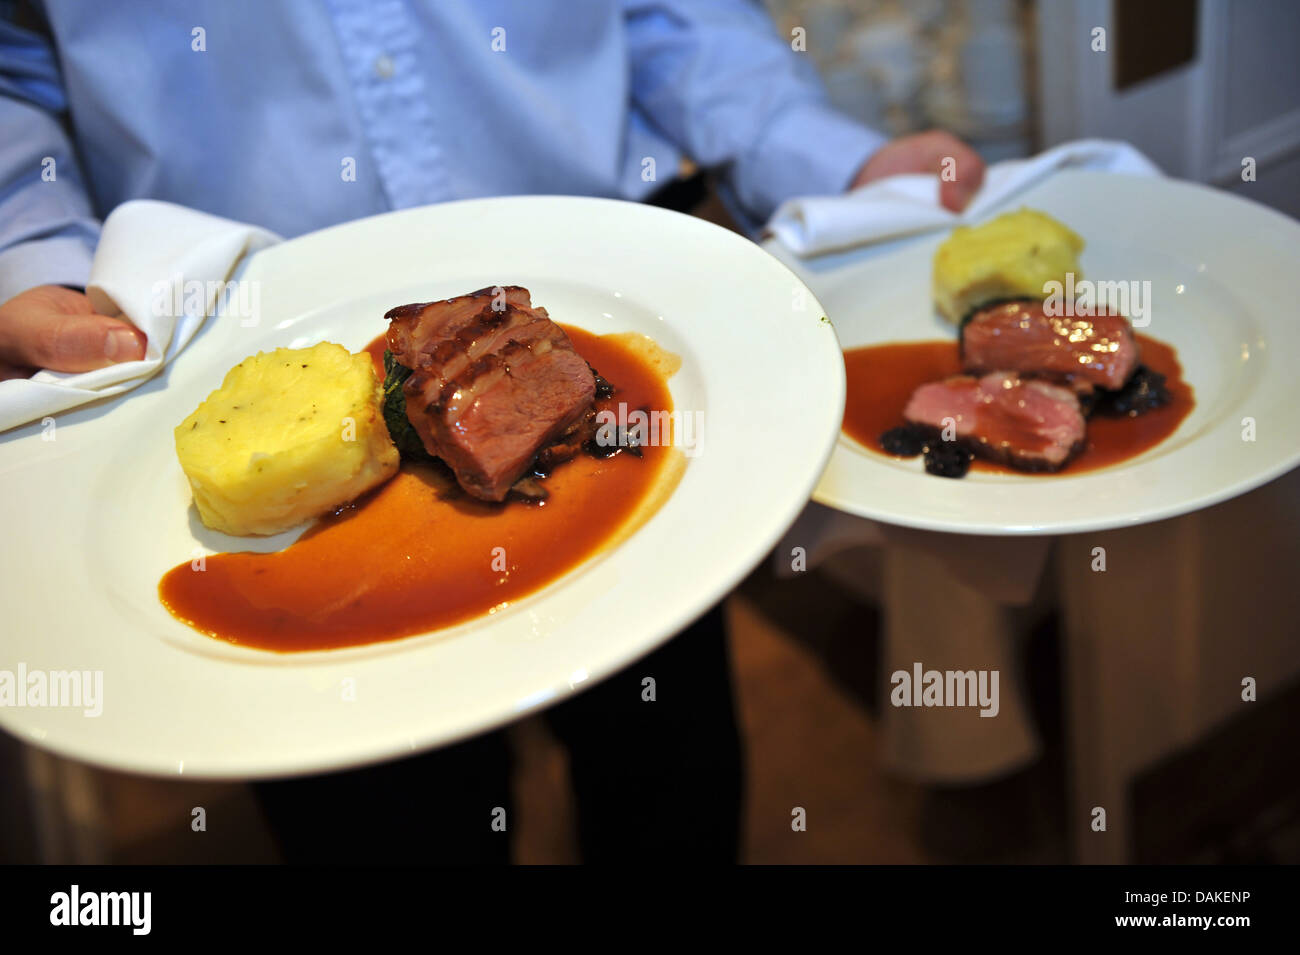 A waiter carries plates of food beef and mashed potato gravy. Stock Photo